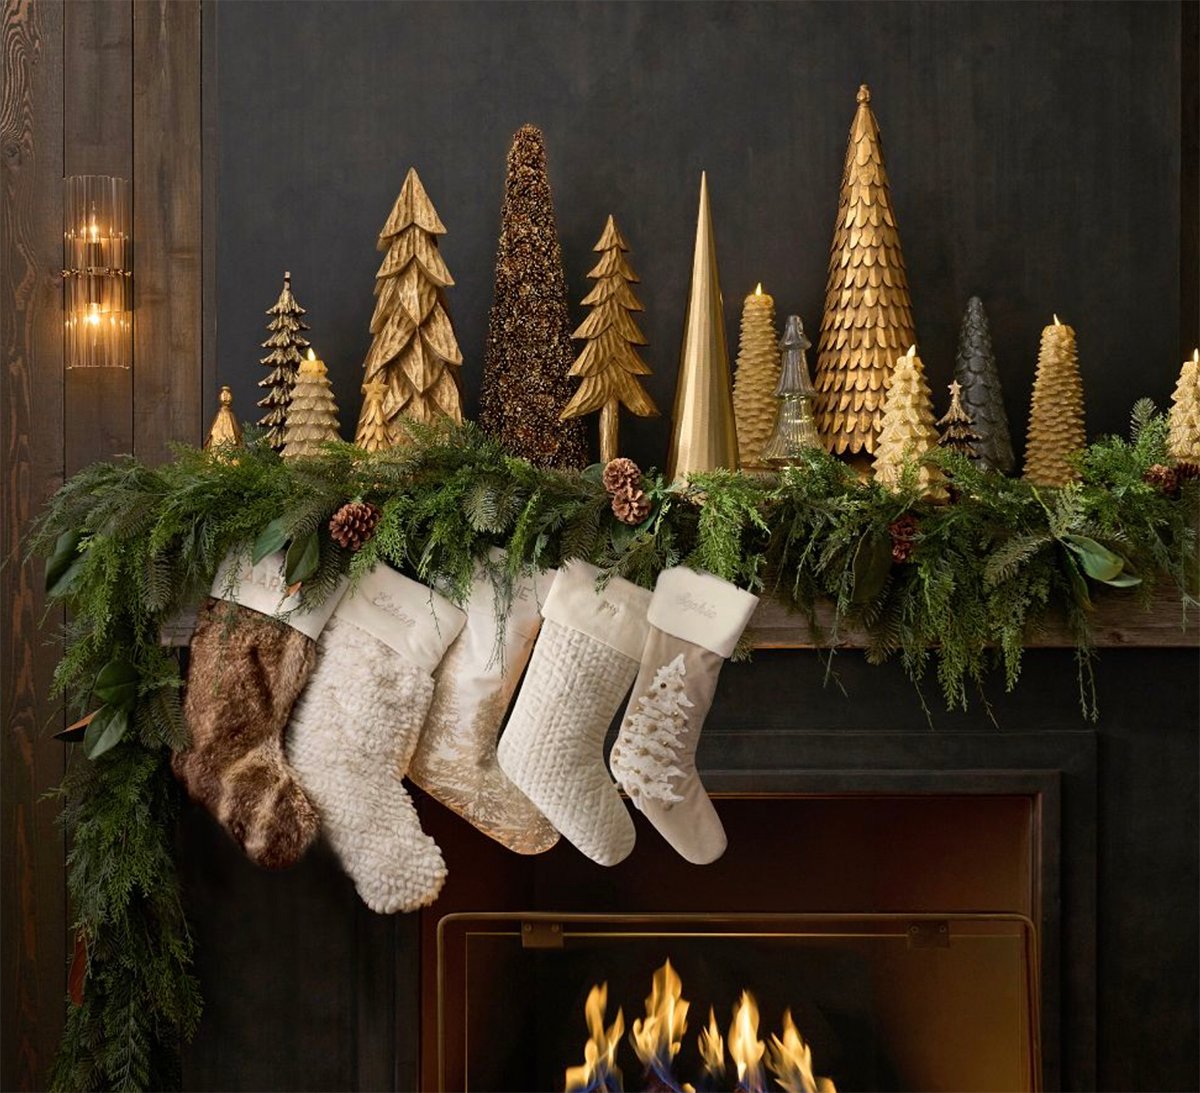 faux cedar and pine garland hung over a lit fire with stockings and gold christmas trees on the mantel